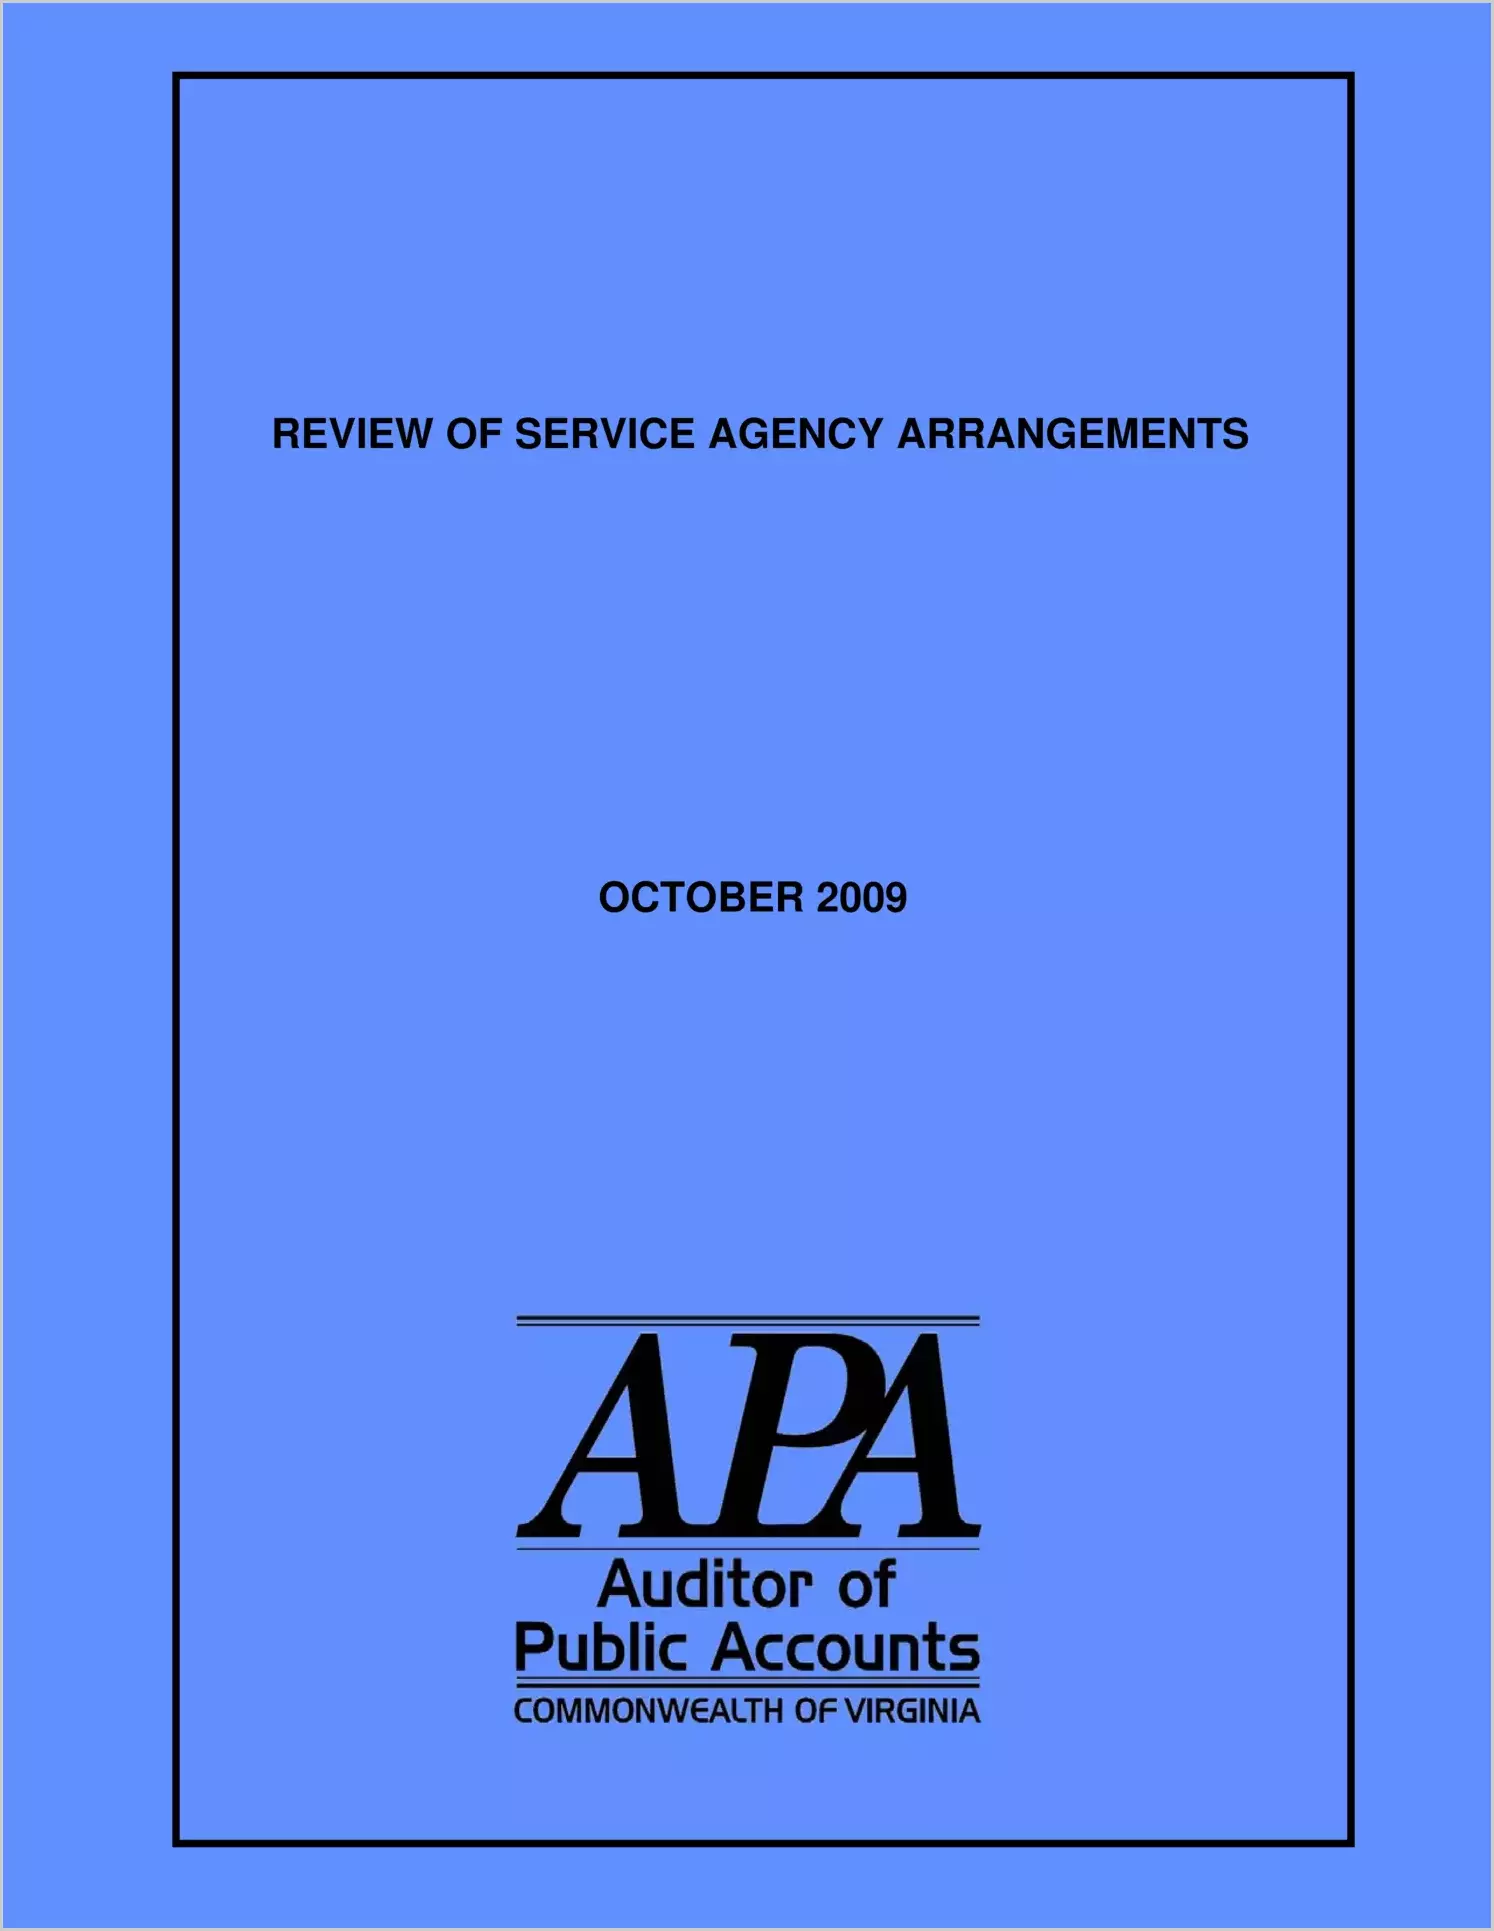 Review of Service Agency Arrangements as of October 2009